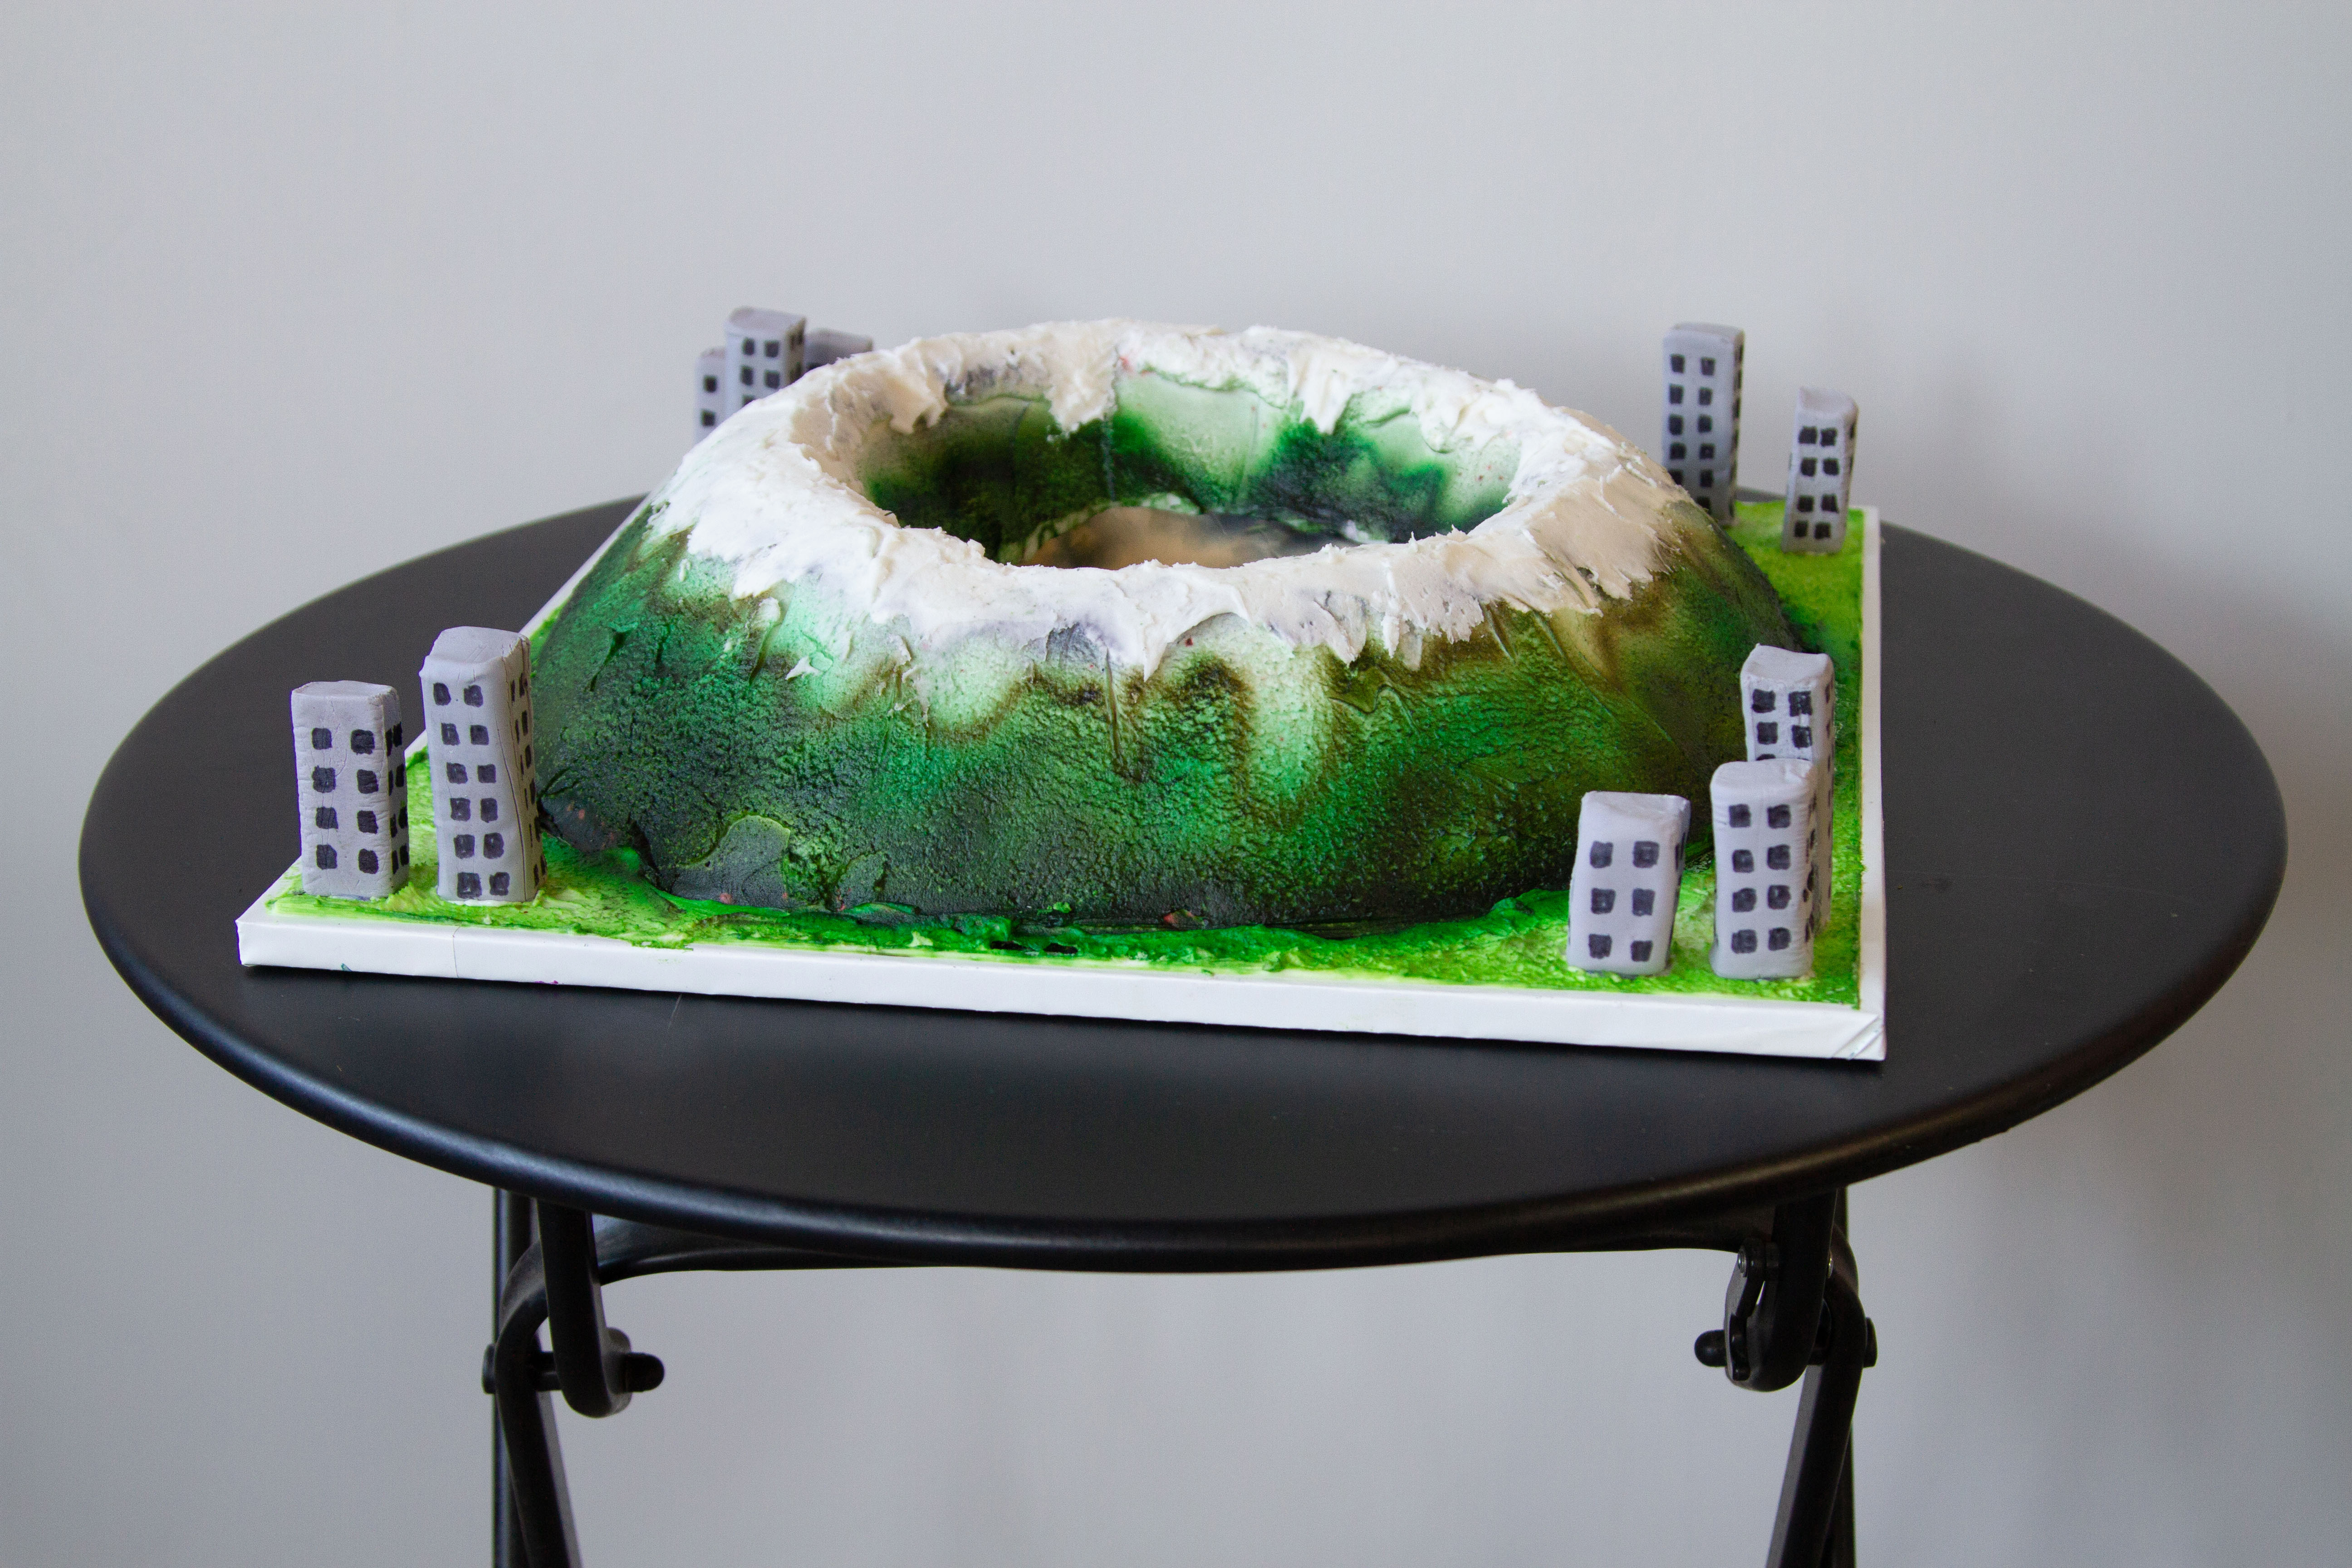 A cake shaped like a mountainous crater with buildings surrouding it on a black table